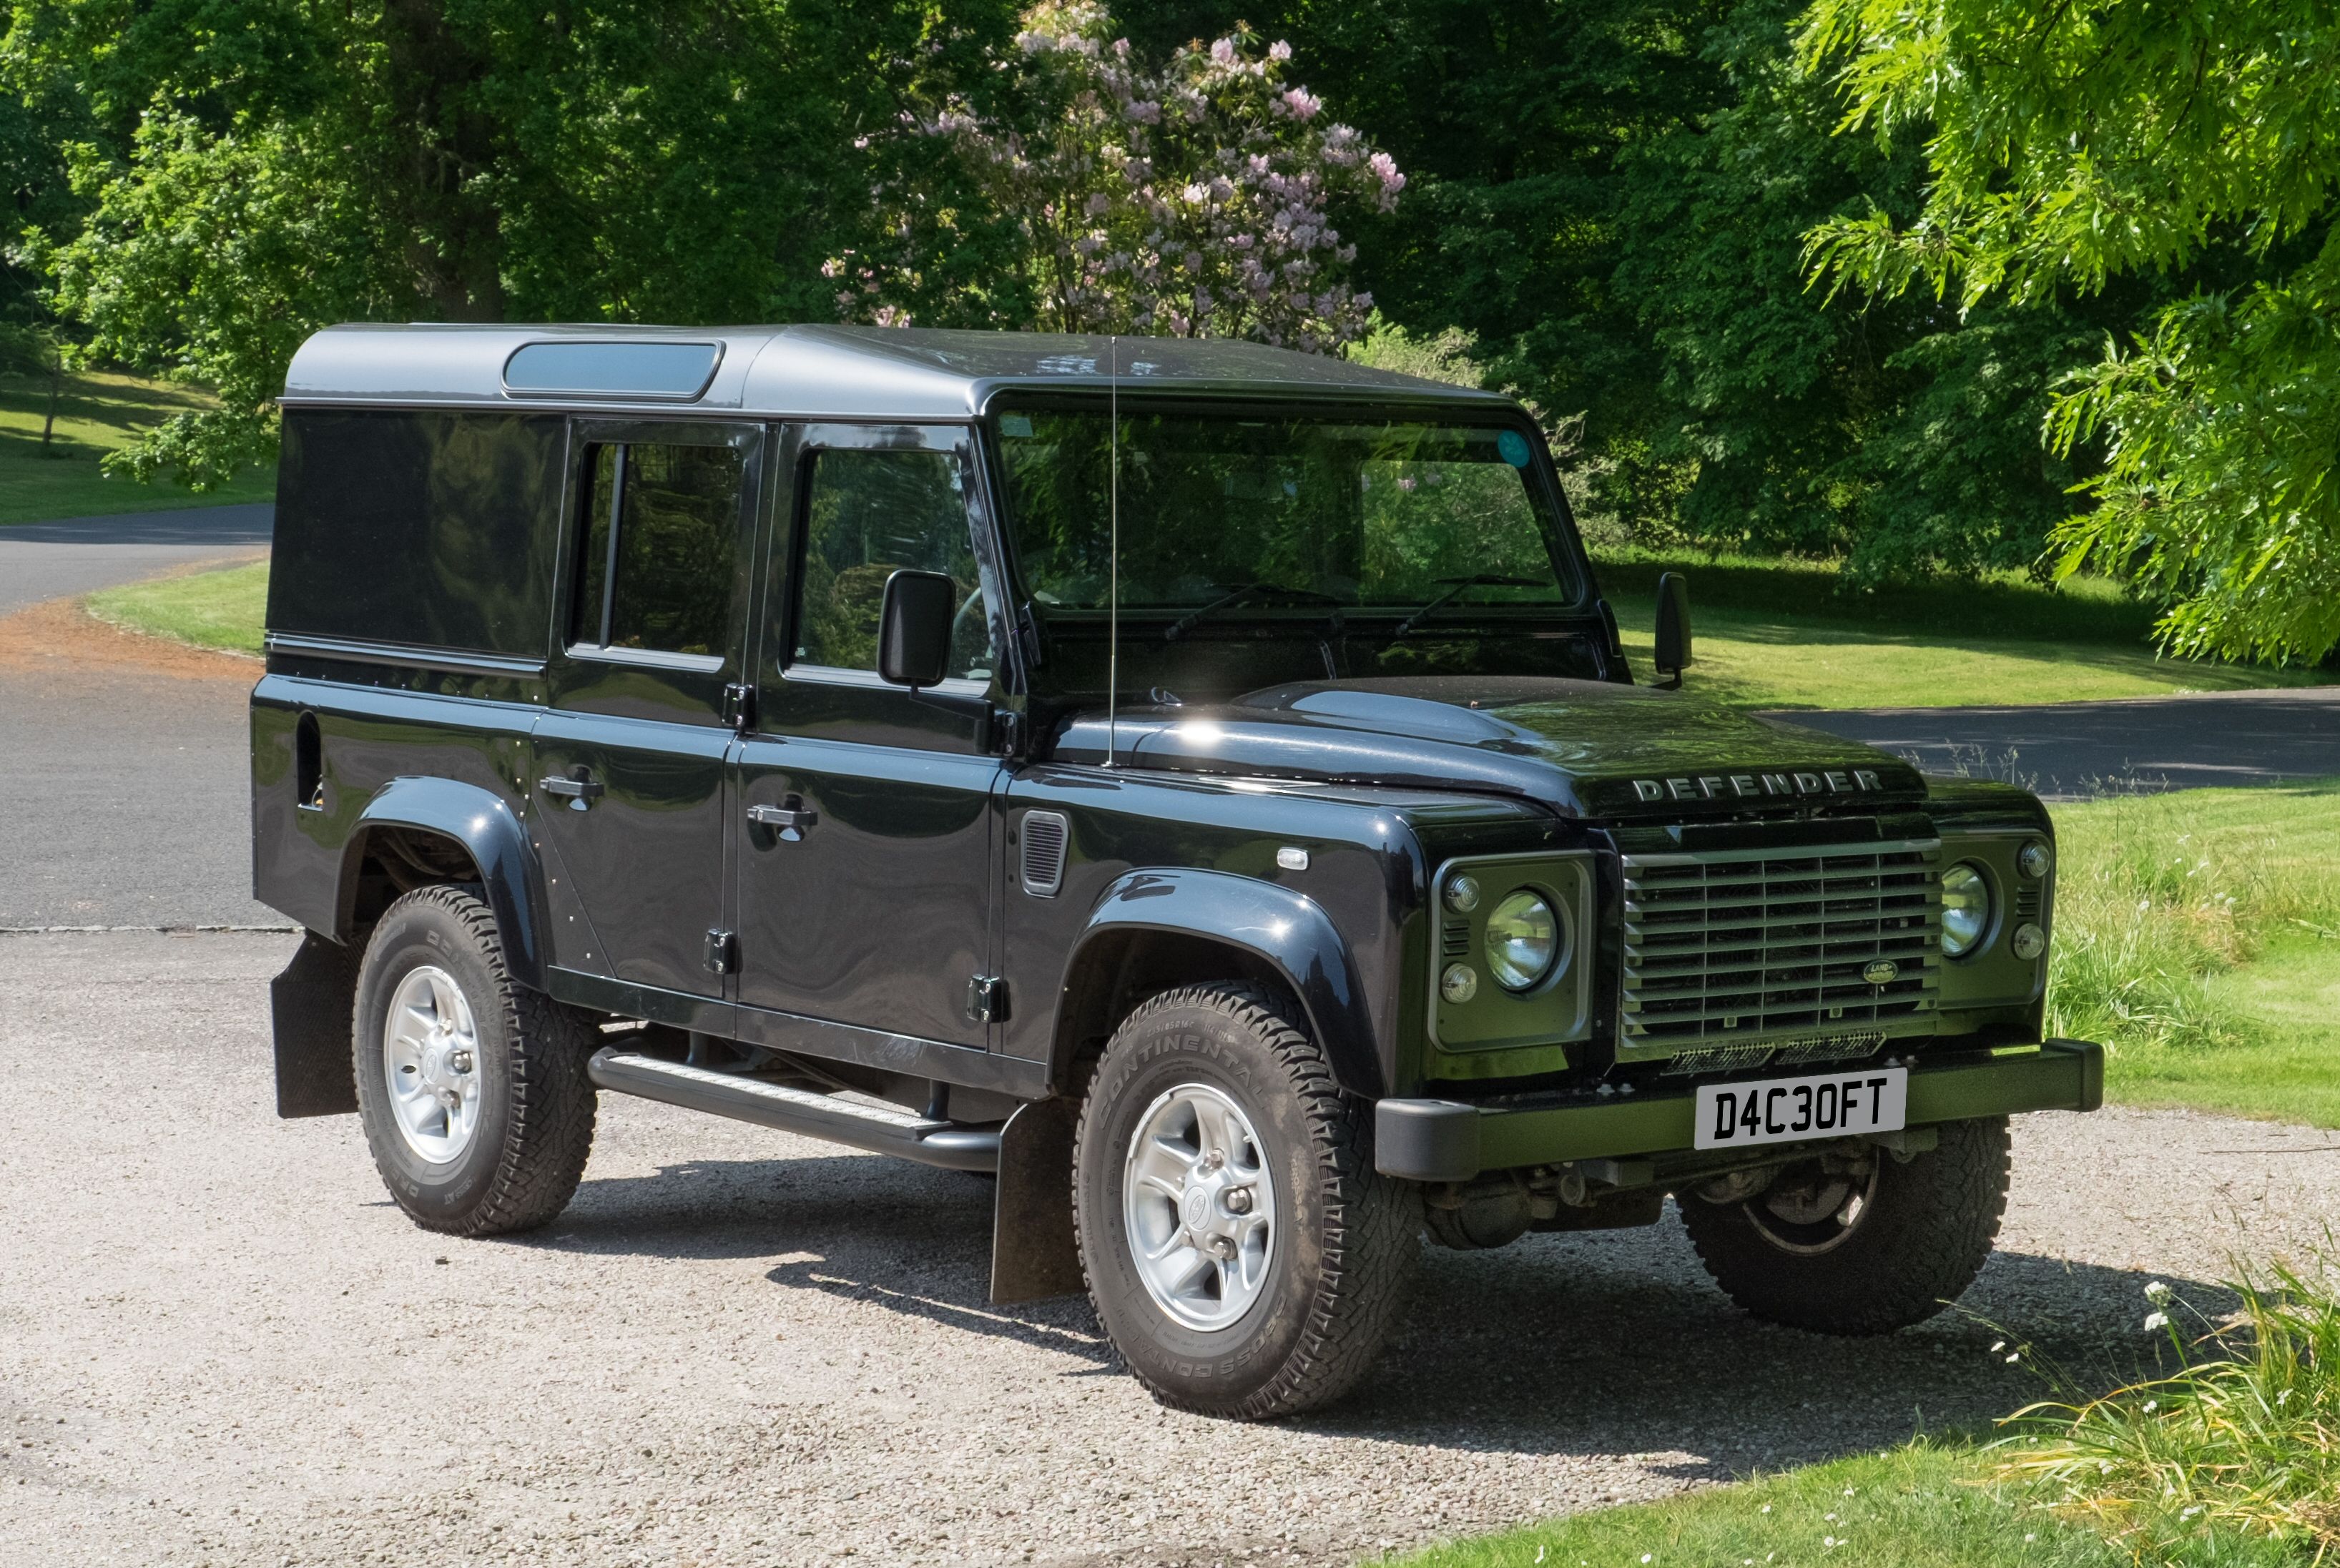 peddelen Matron liefde Here's The Coolest Features Of The Land Rover Defender